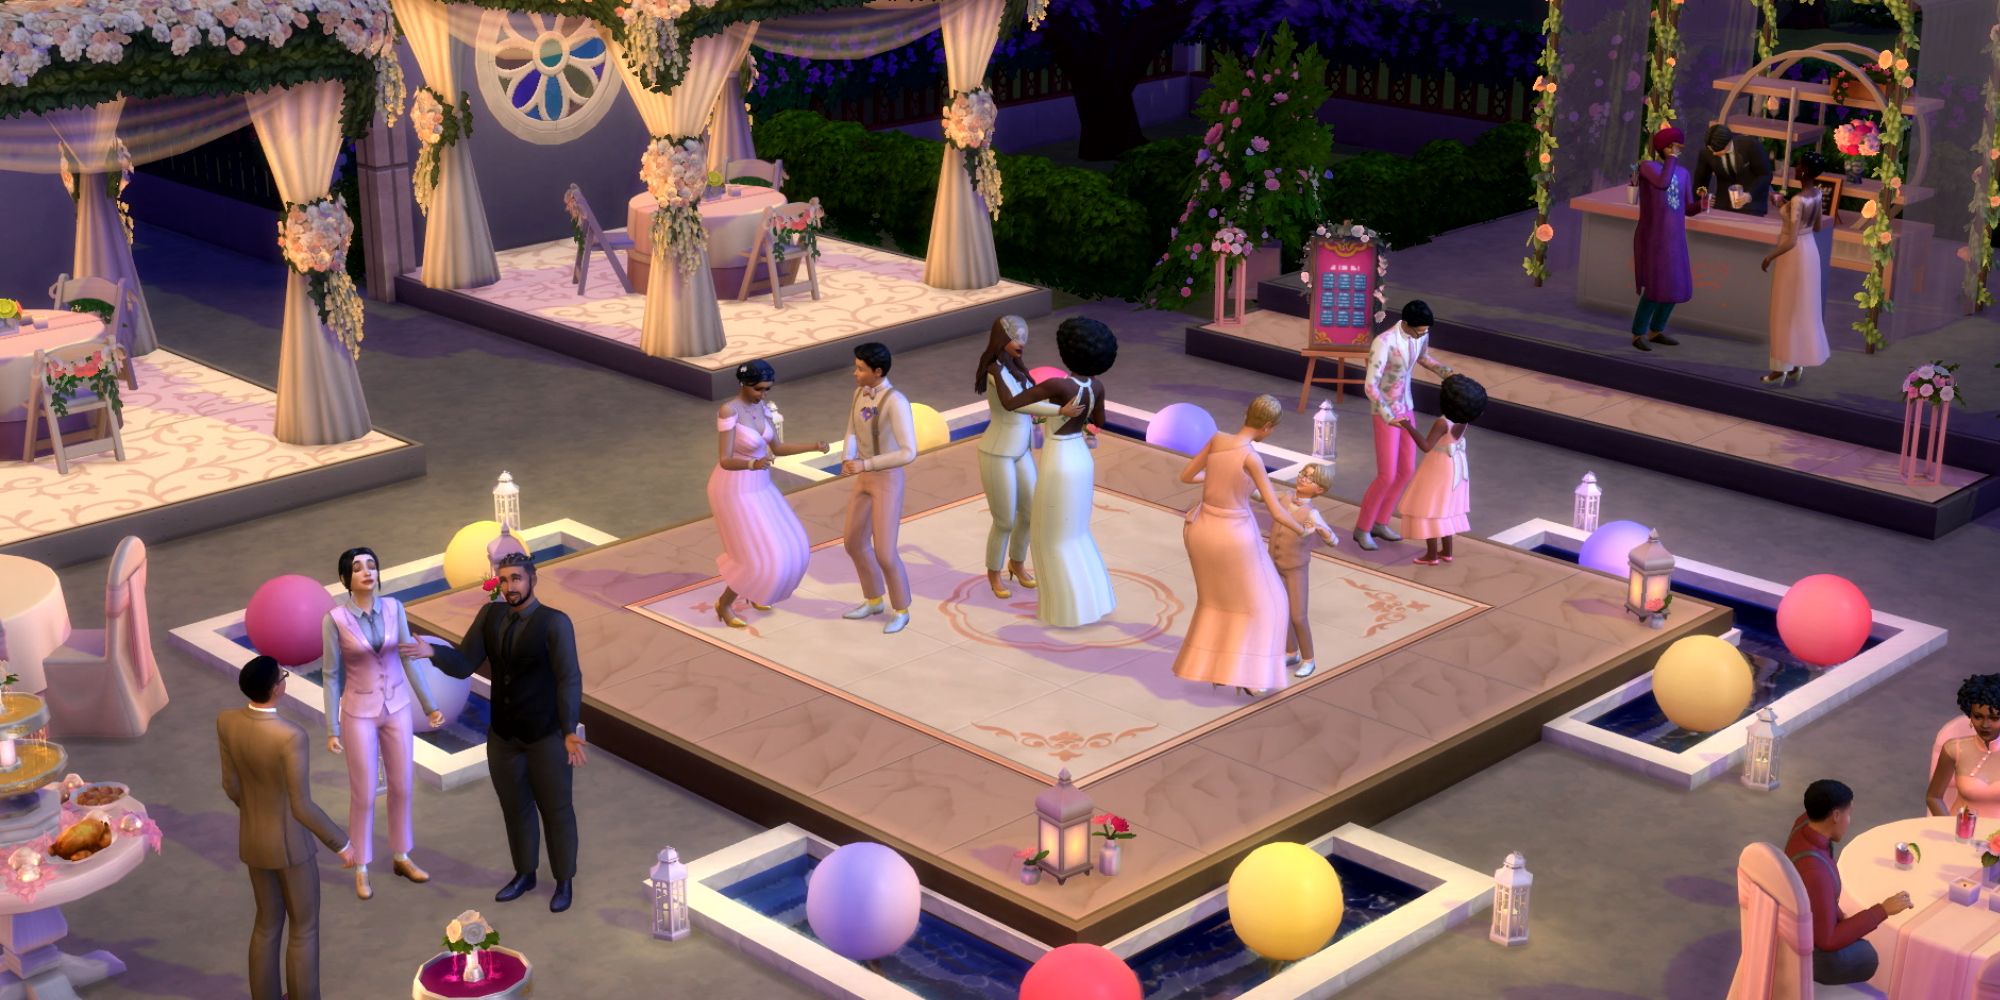 Sims-4-wedding-reception-with-dancing-1